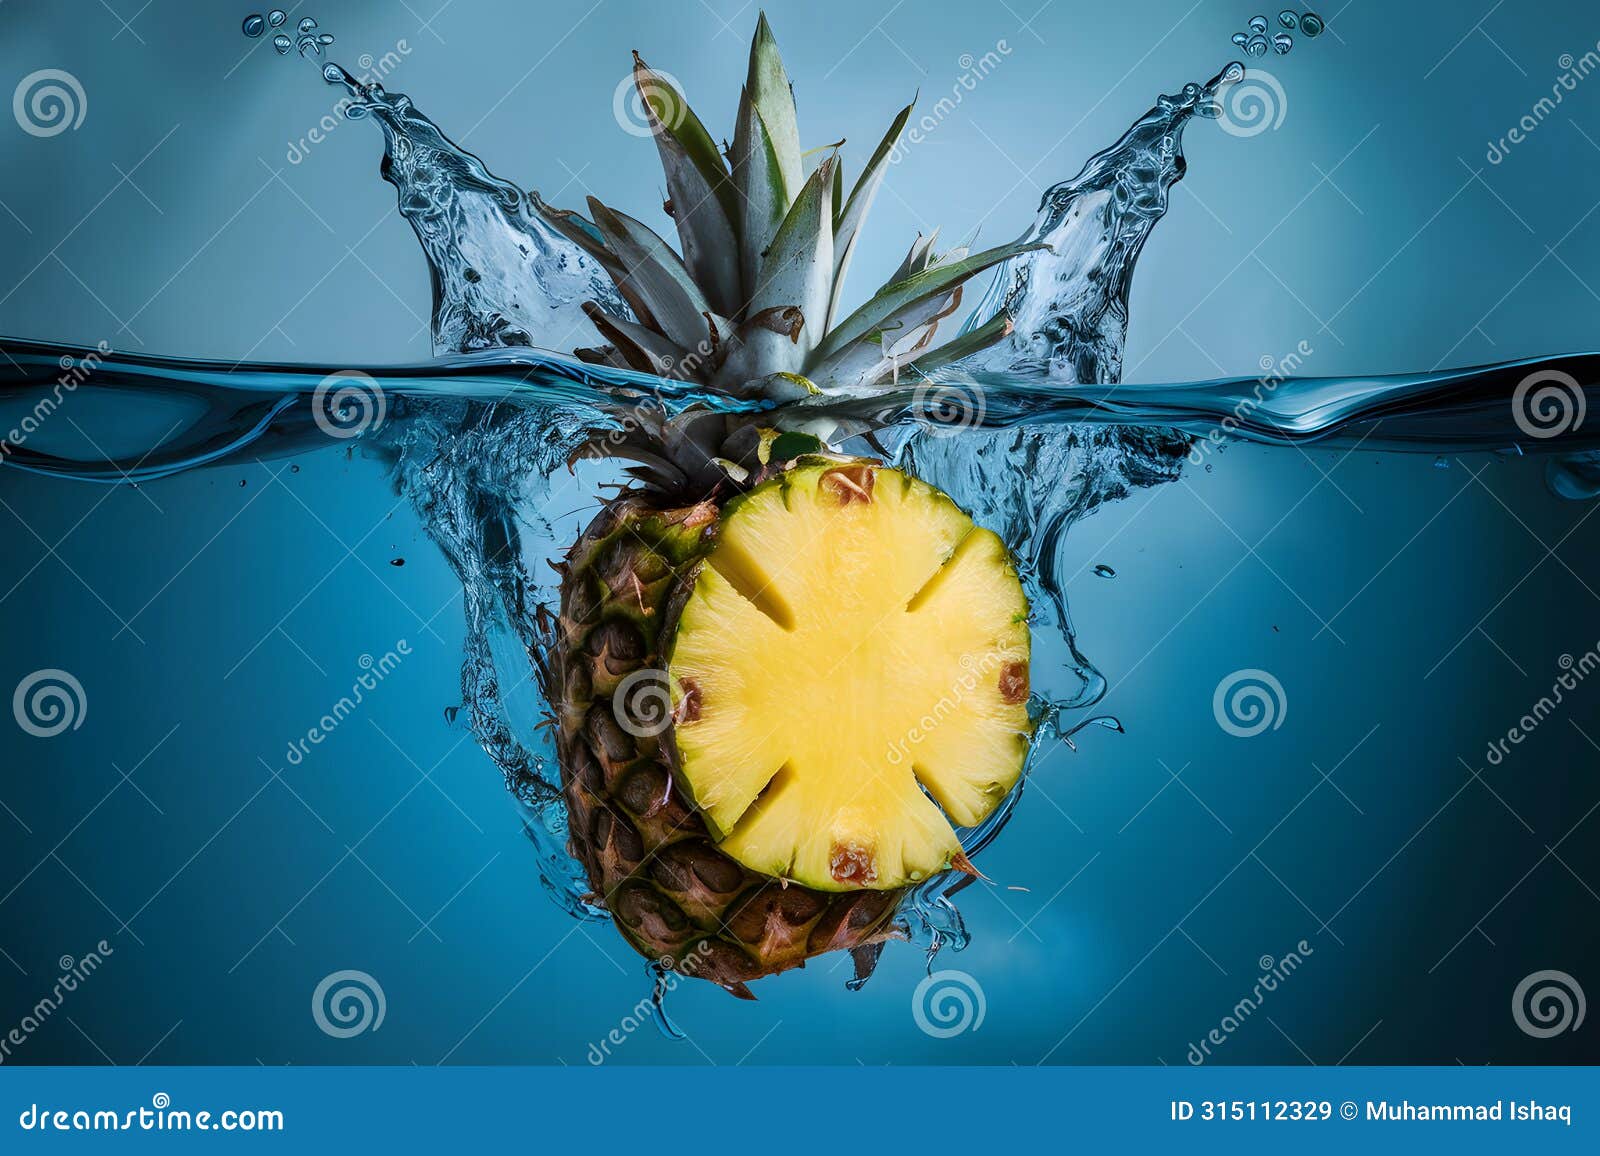 a dynamic portrayal of water splash with sliced pineapple